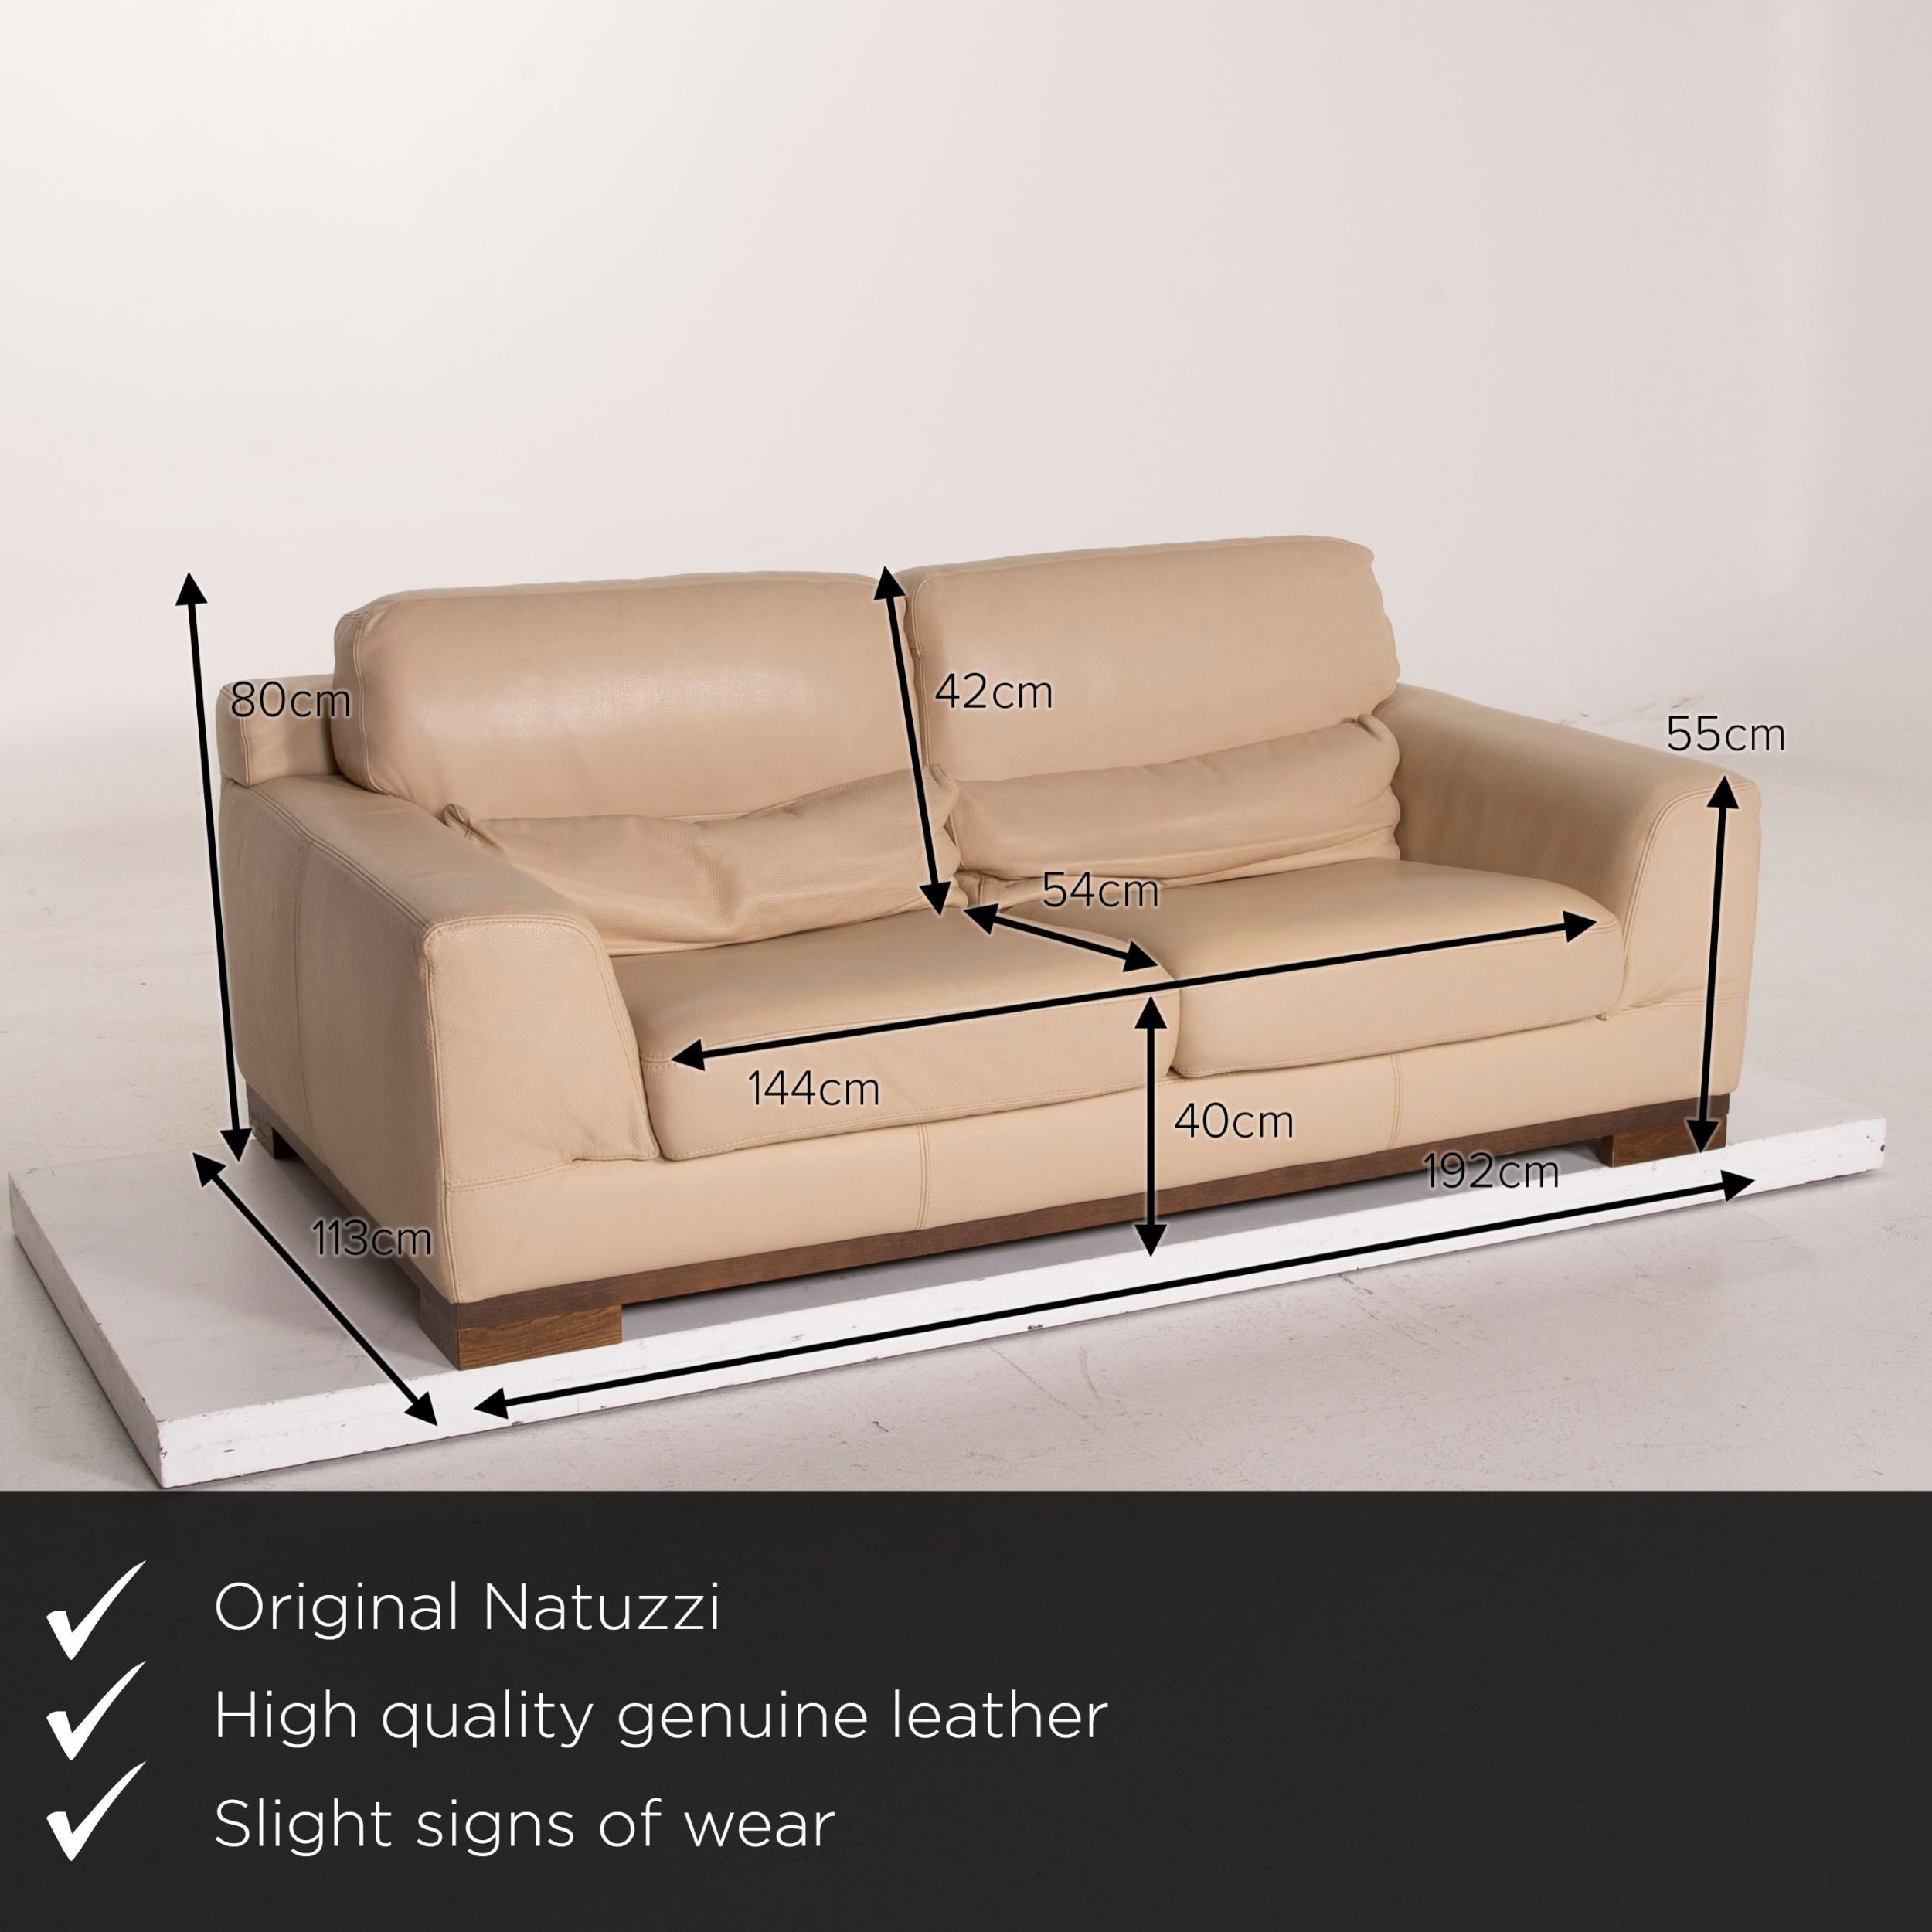 We present to you a Natuzzi 2085 leather sofa set beige two-seat ottoman.


 Product measurements in centimeters:
 

Depth 113
Width 192
Height 80
Seat height 40
Rest height 55
Seat depth 54
Seat width 144
Back height 42.
 